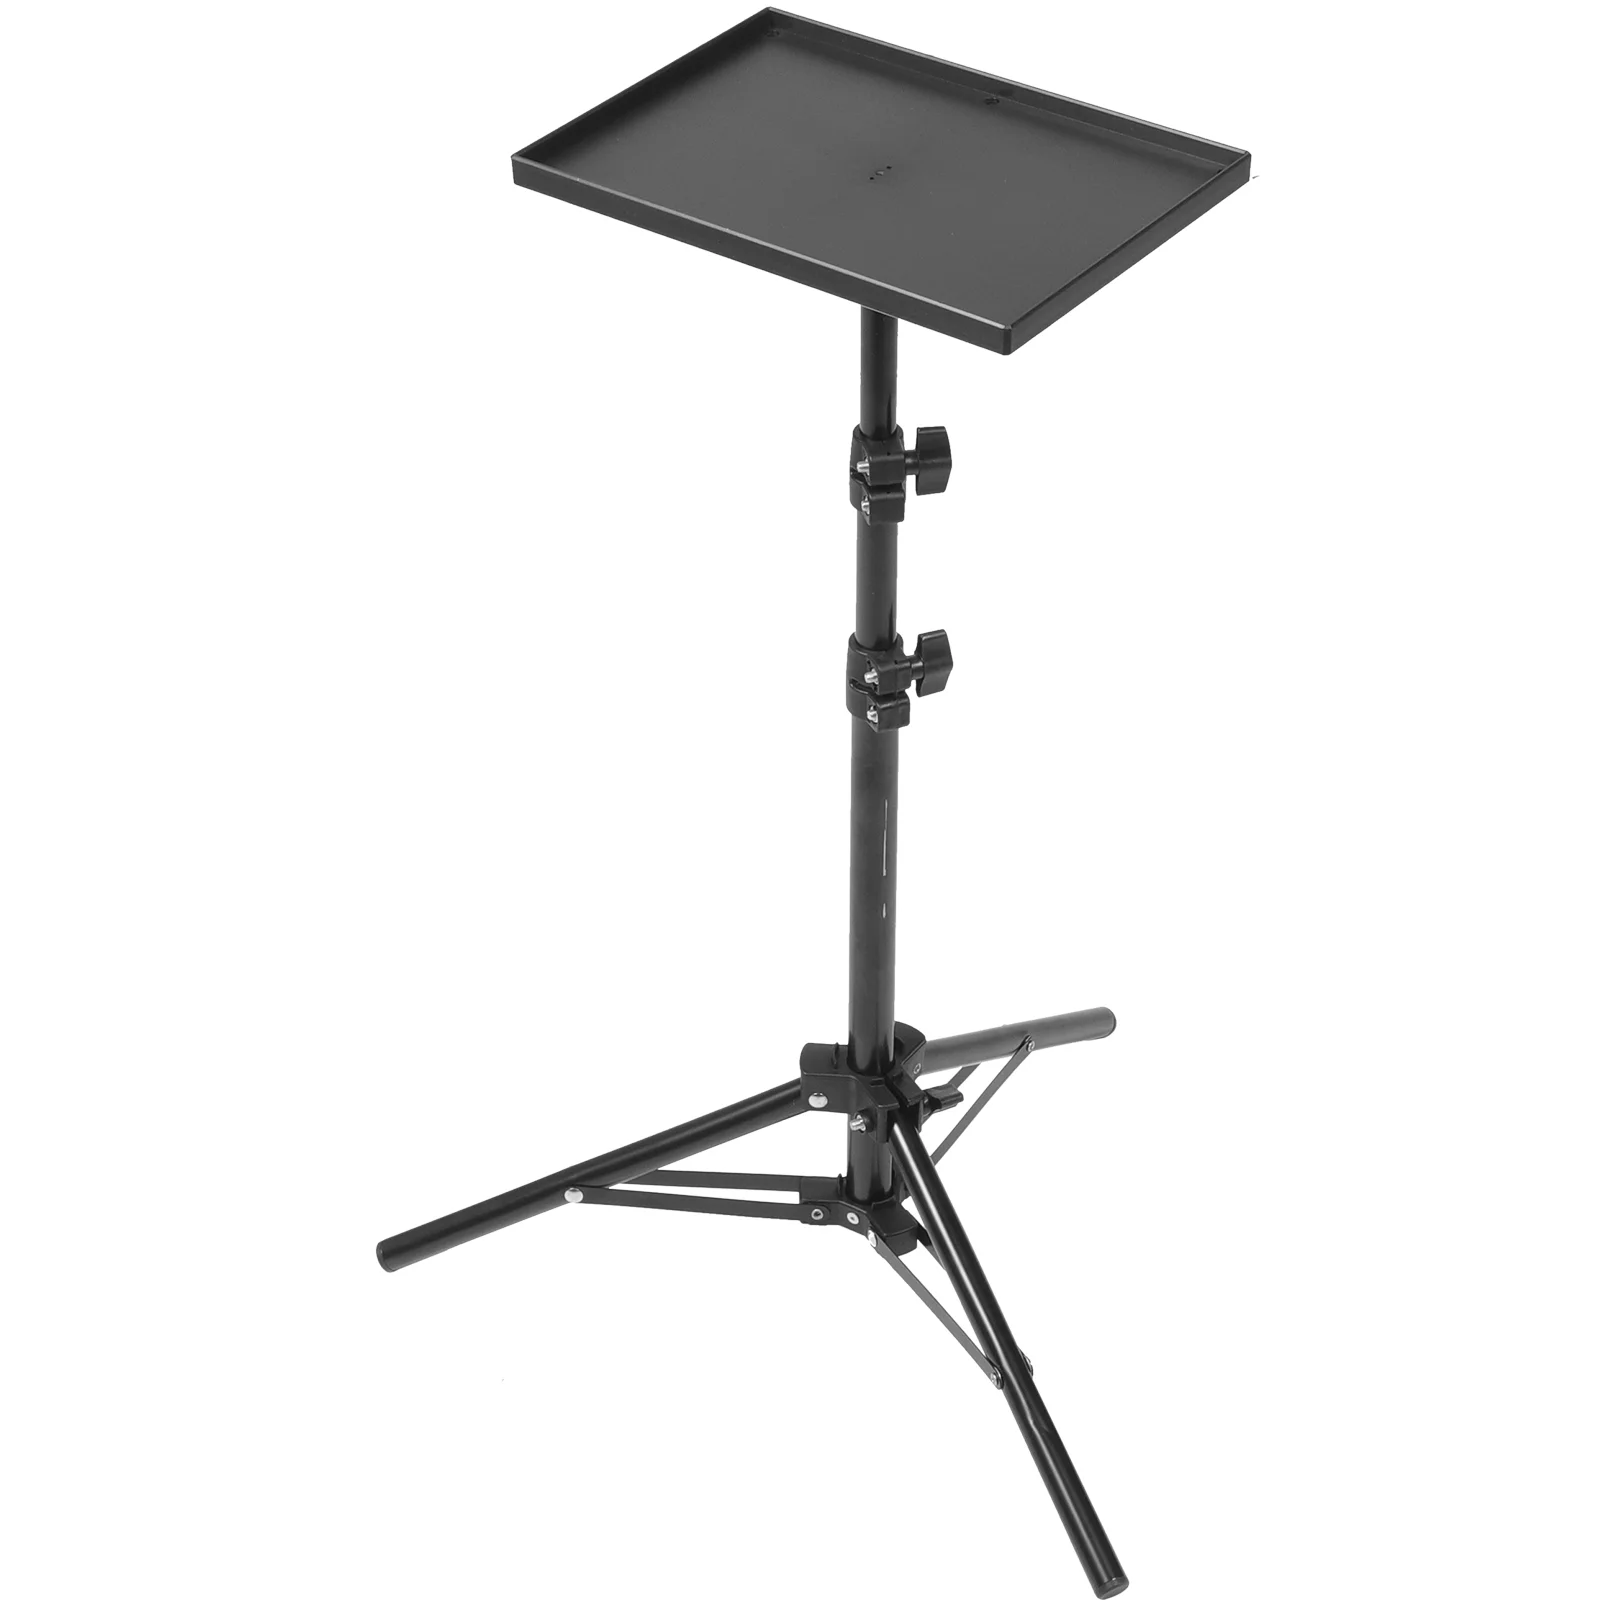 120cm 55cm Projector Stand Laptop Stand Projector Tripod Adjustable Tabletop Floor Projector Stand Camera Holder Stand Bracket